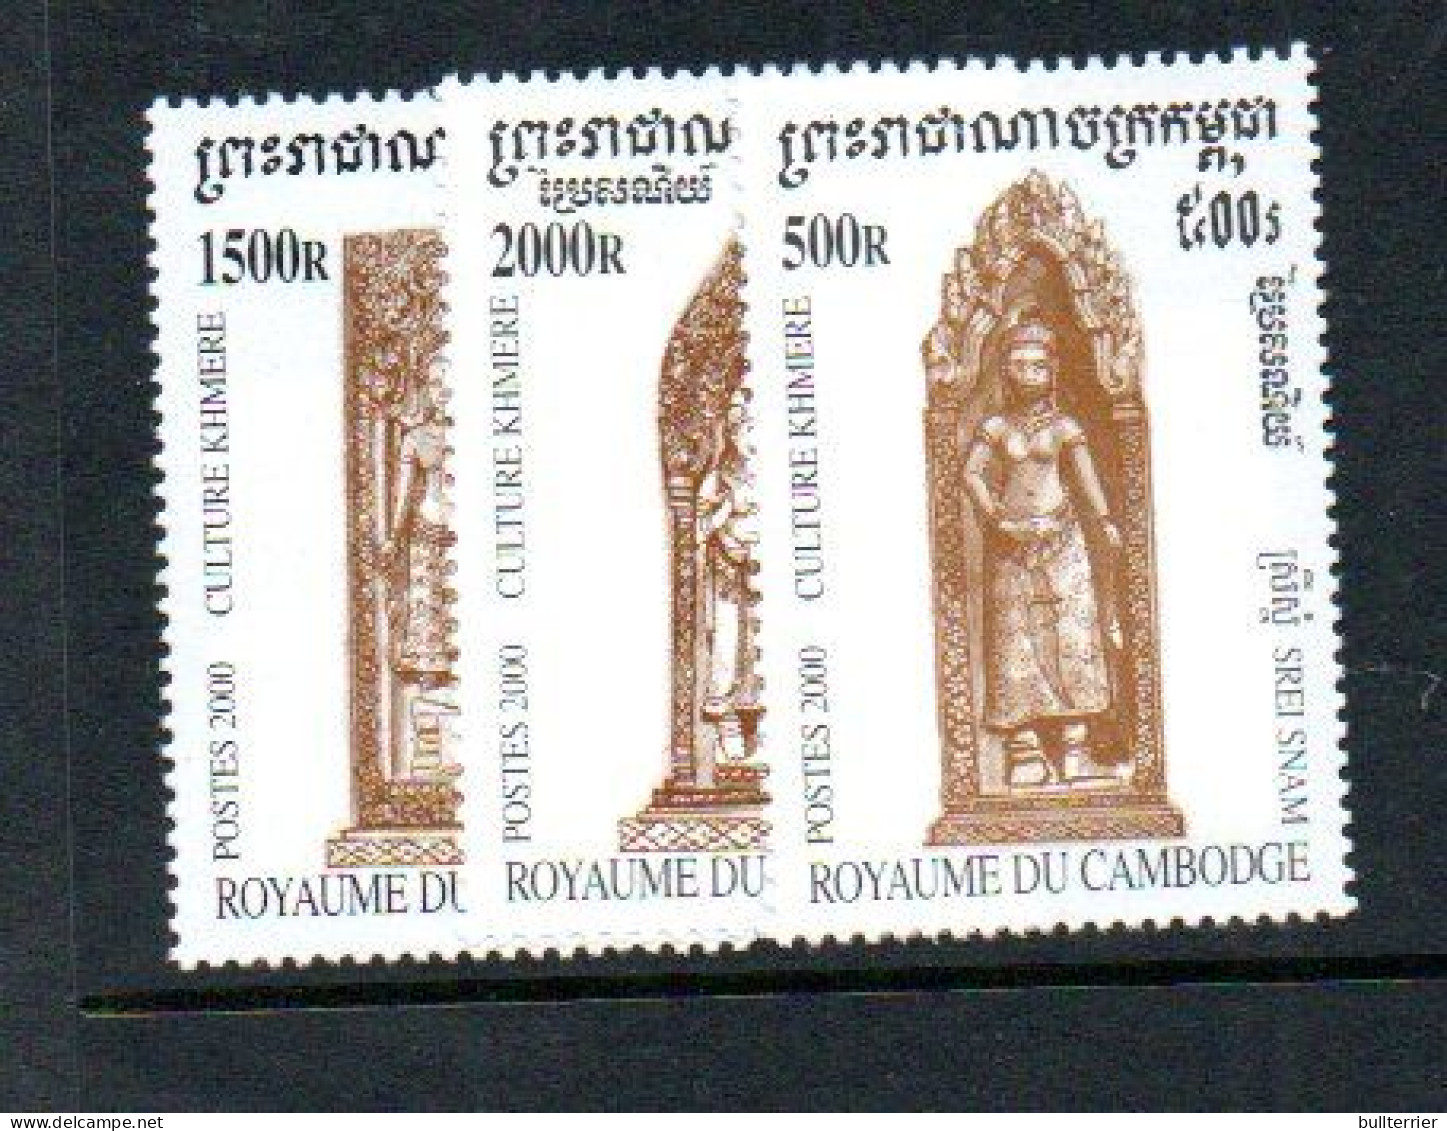 CAMBODIA - 2000  - KHMERE CULTURE ET OF 3  MINT NEVER HINGED - Cambogia